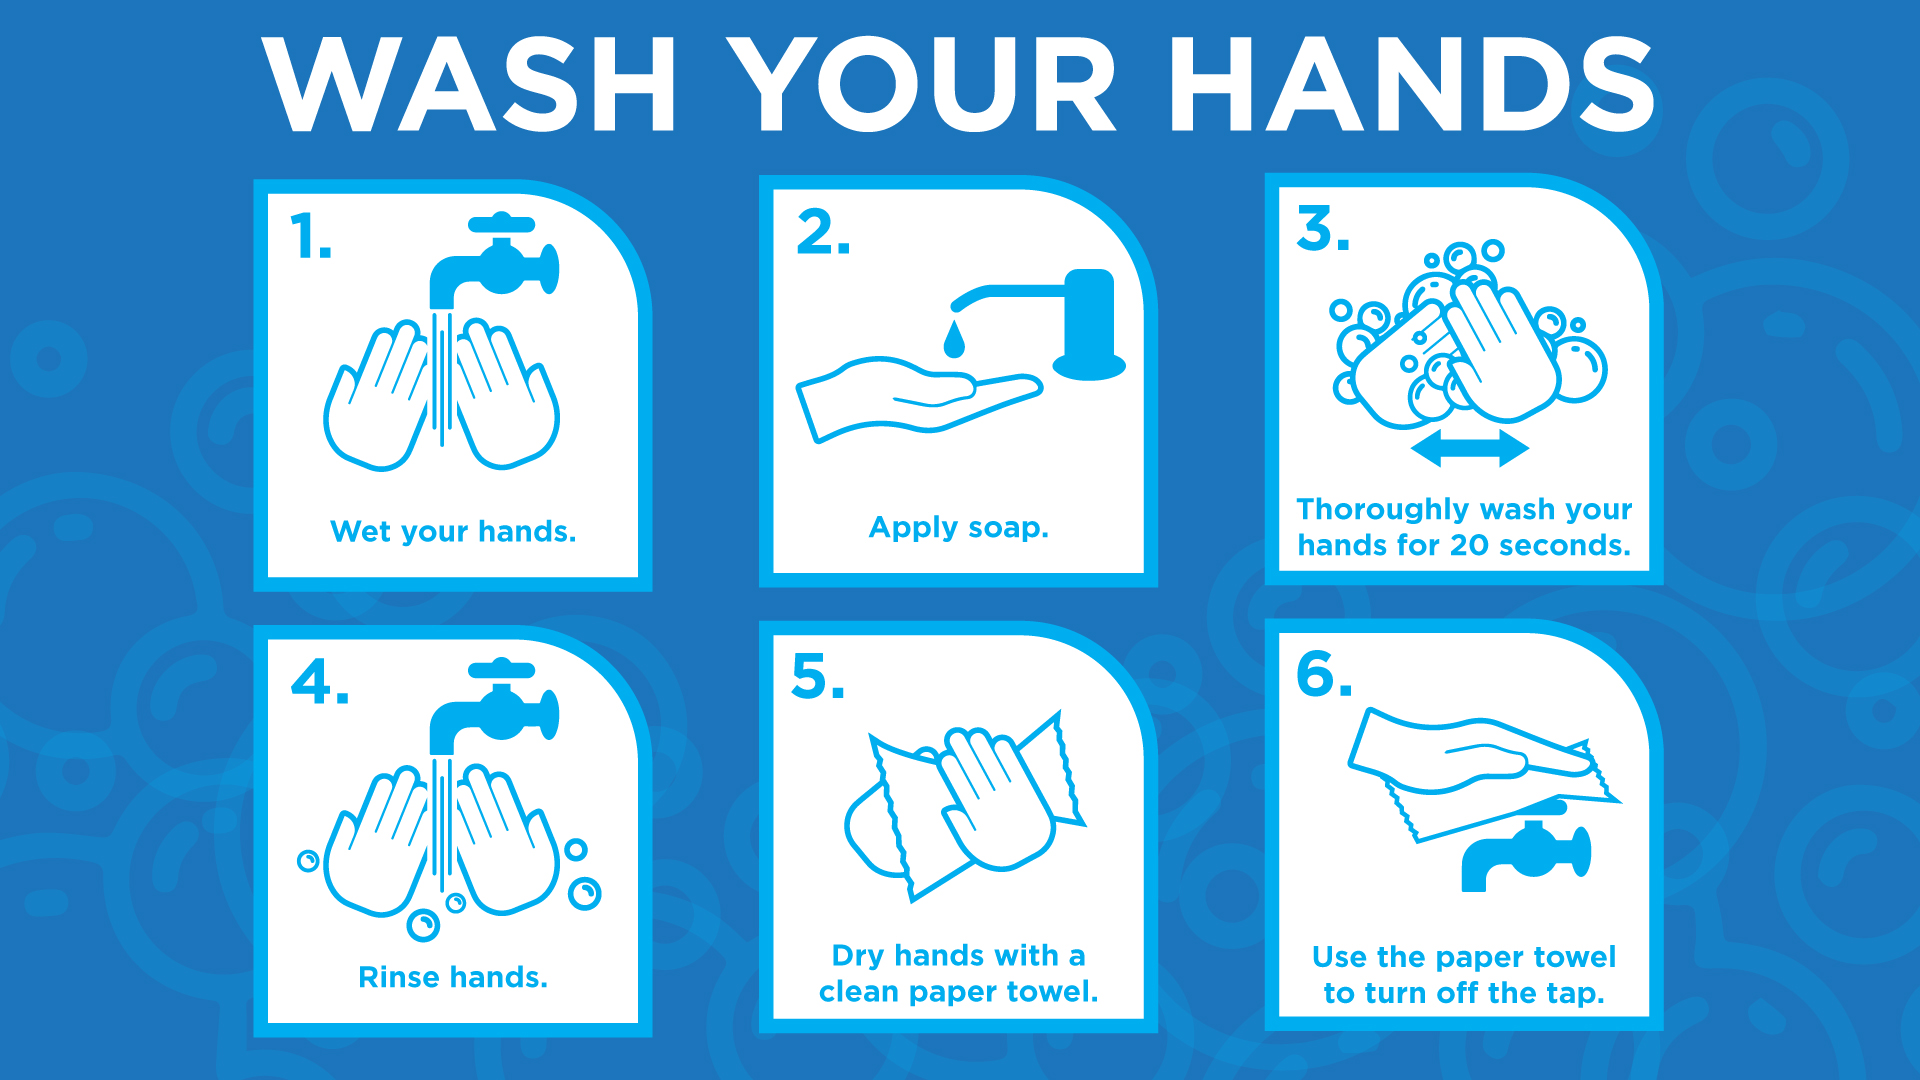 Wash Hands Poster 24"x12"